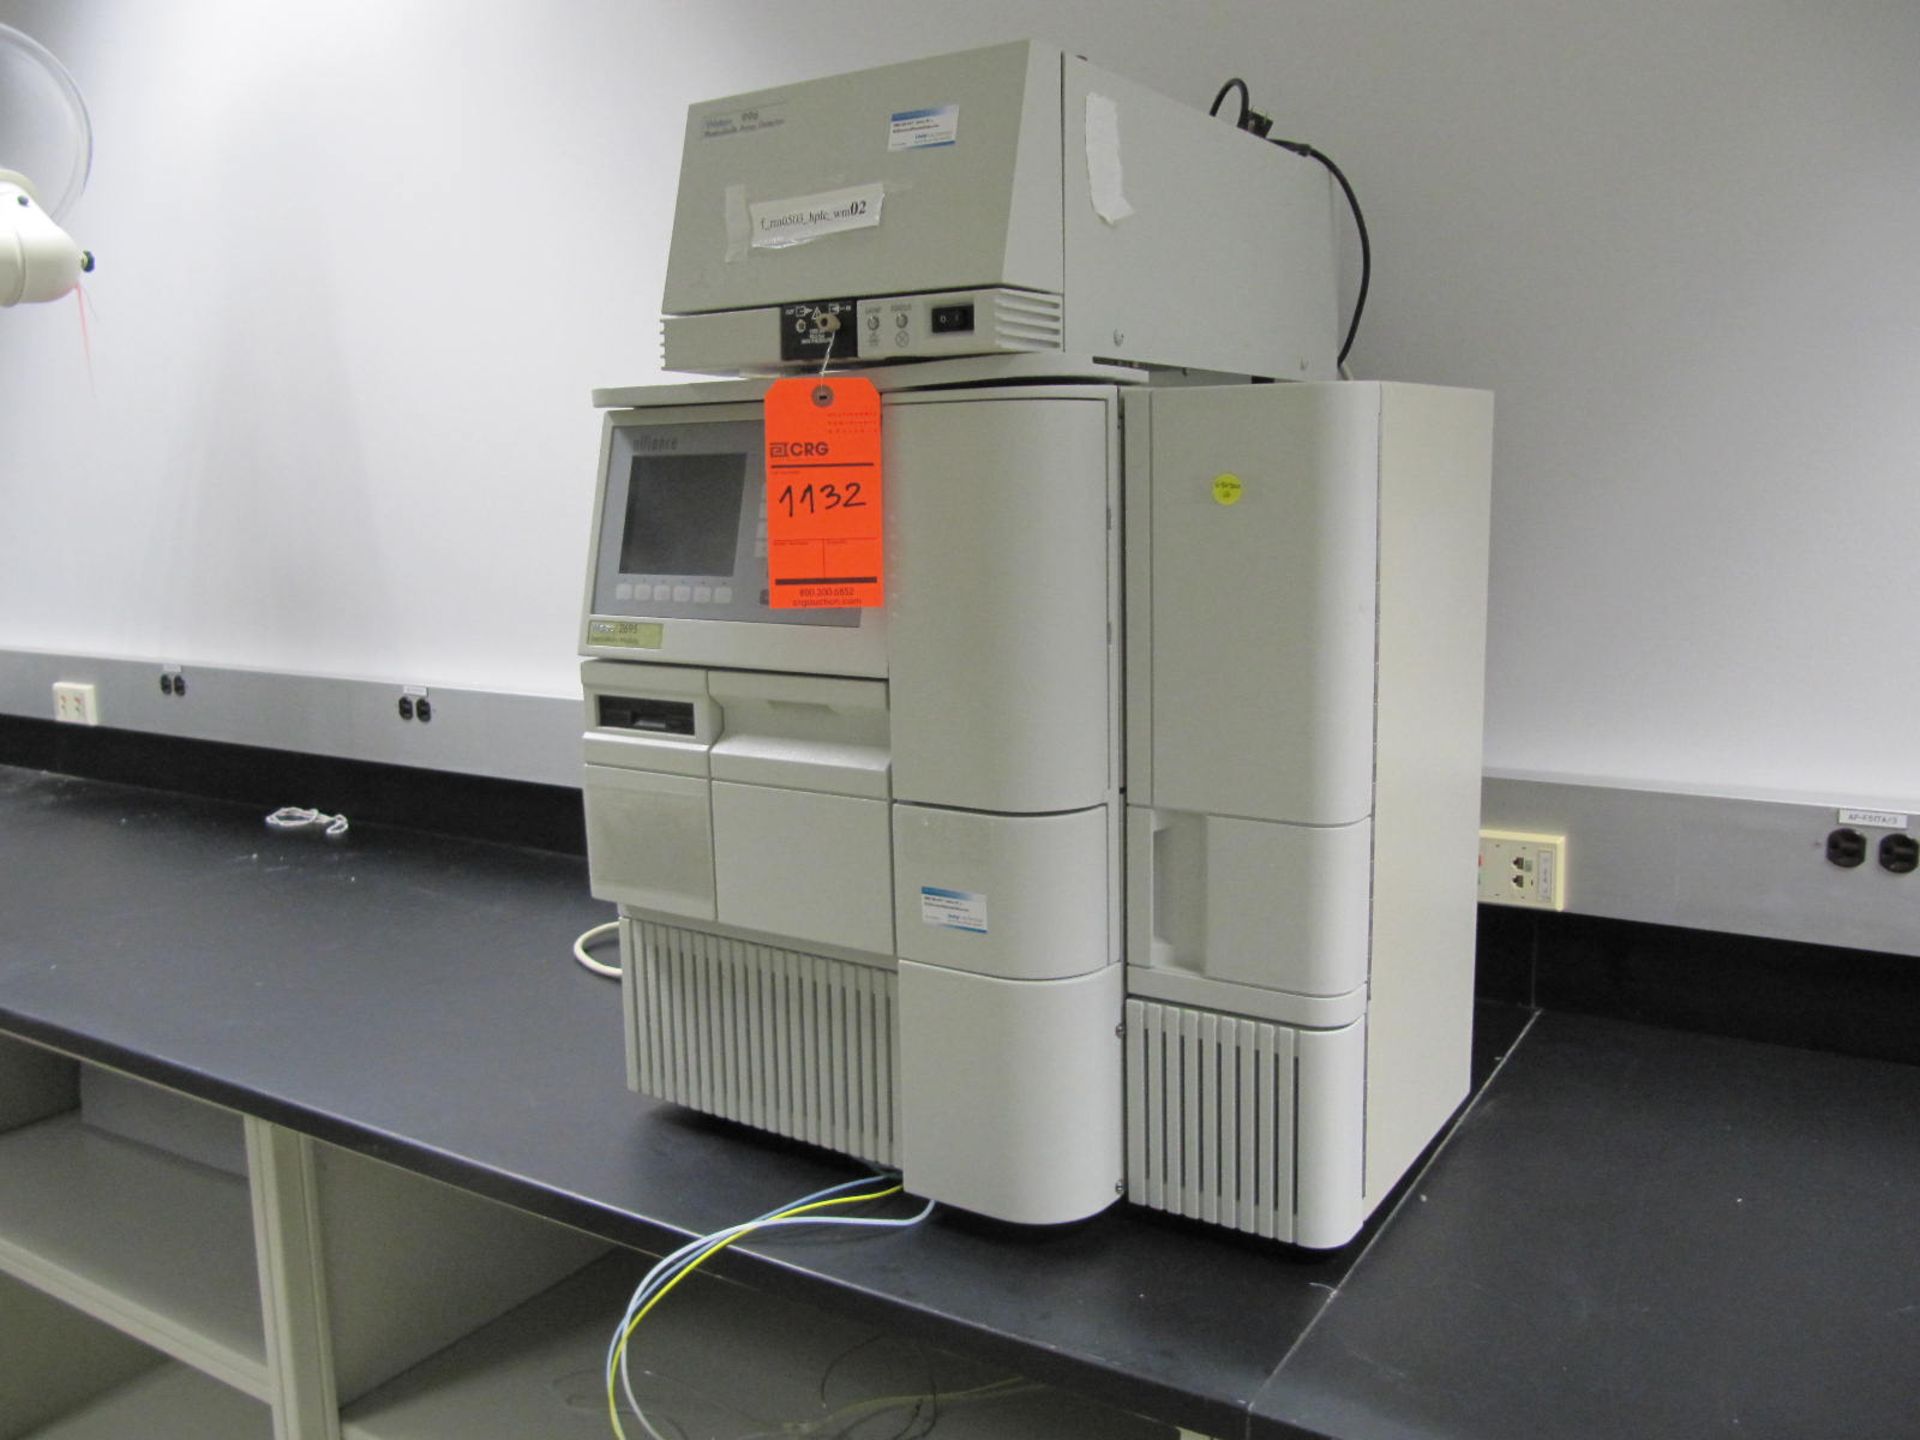 Waters HPLC including sperations module, 2695, s/n E99HC 299, Waters 996 Photodiode Array